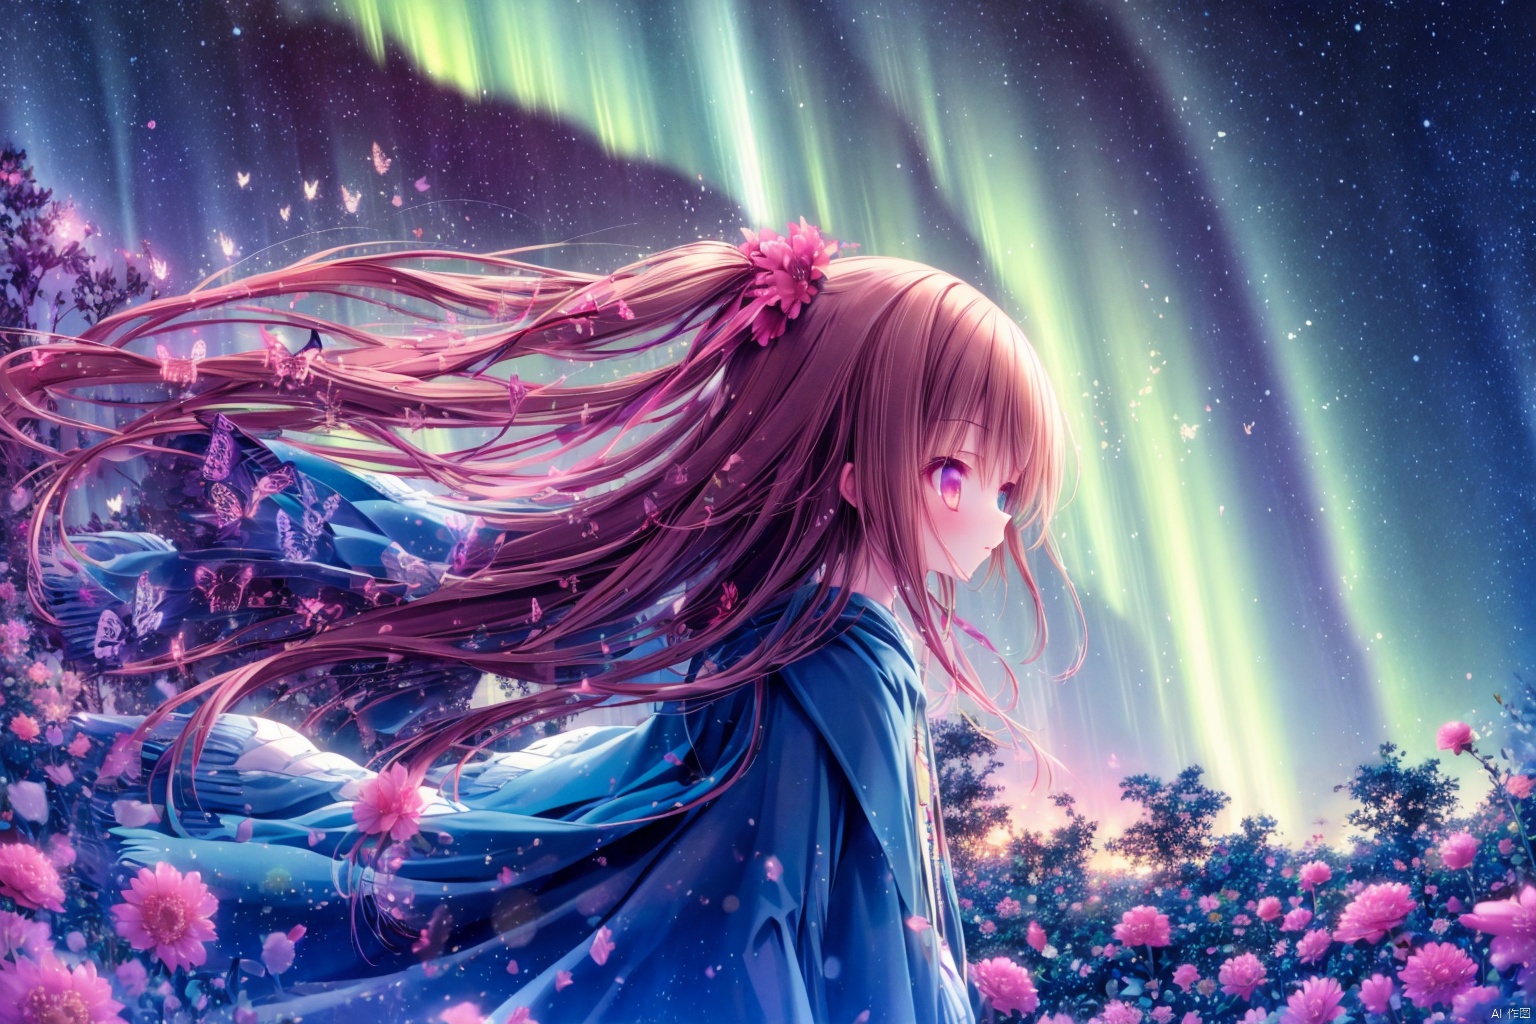  Silhouette, 1 girl, extra long hair, floating hair. Blossomed hair, with butterfly, cloak, in the garden, at night, light particles, fireflies, starry sky, colorful aurora 0.4, night, starry sky, silhouette, backlight, sunset, dazzling